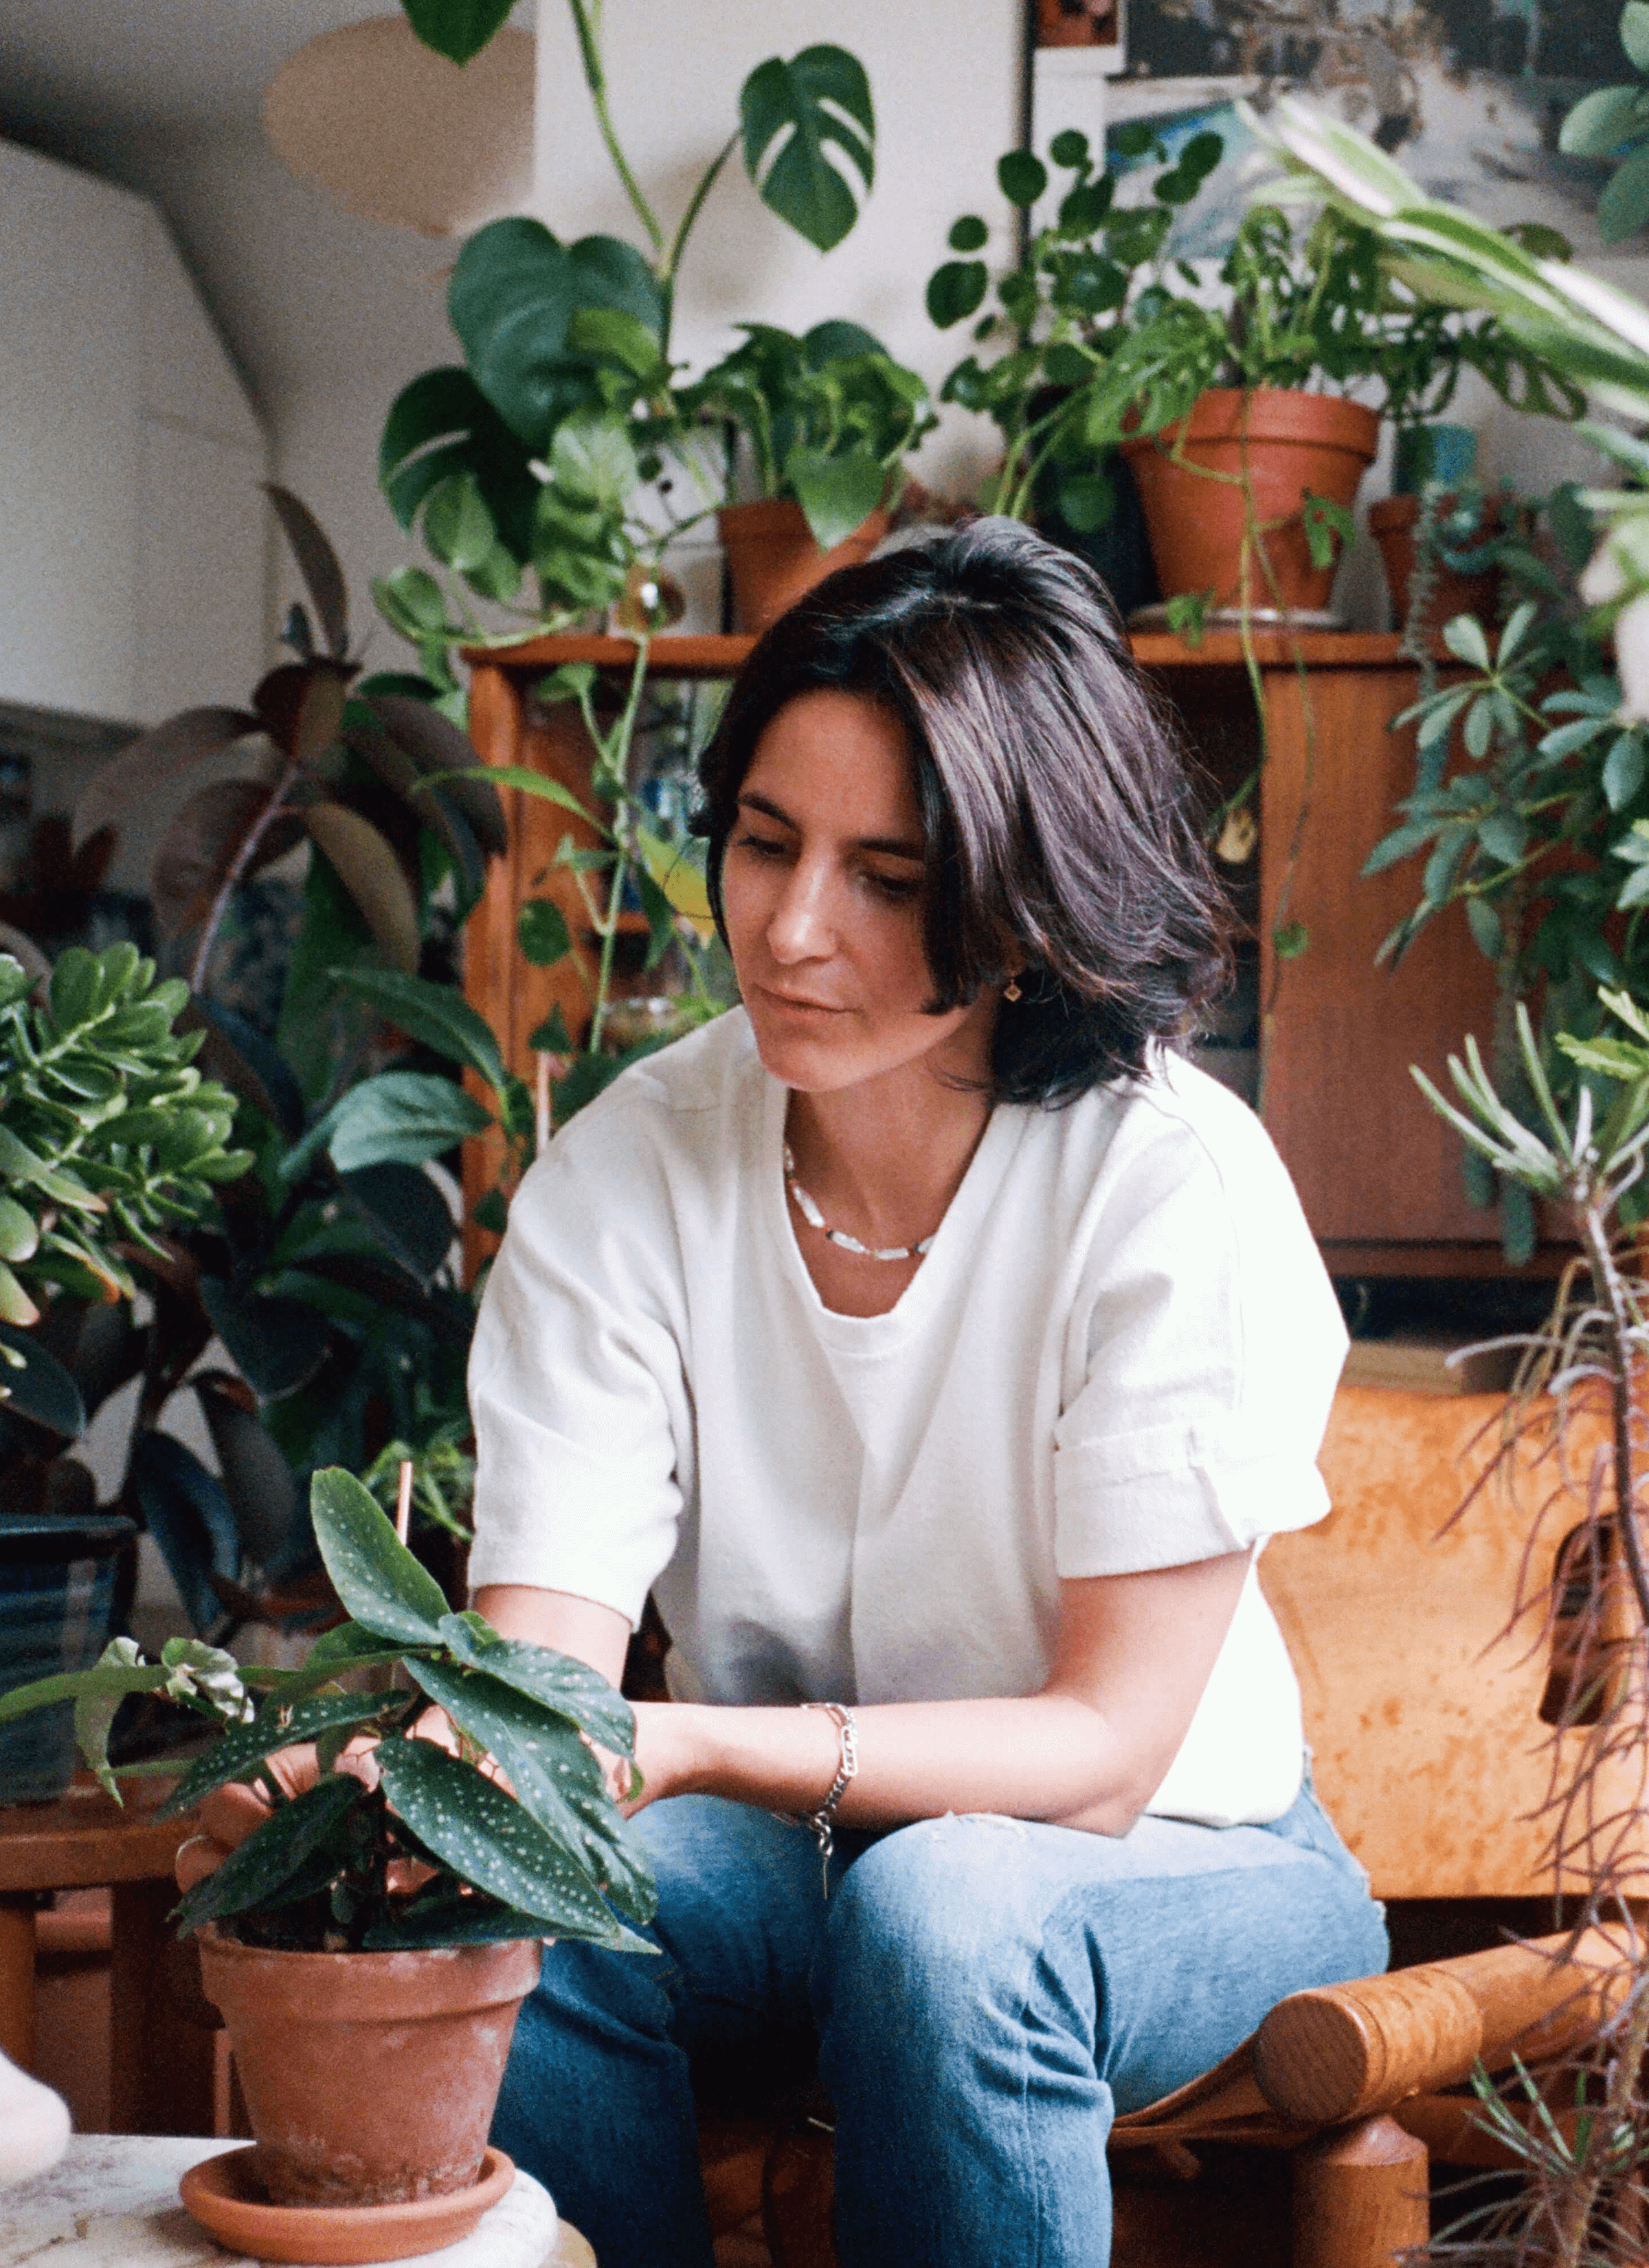 Leslie David is sitting on the chair taking care of the Angel wing begonia plant on a white marble table in her studio, surrounded by a collection of house plants.